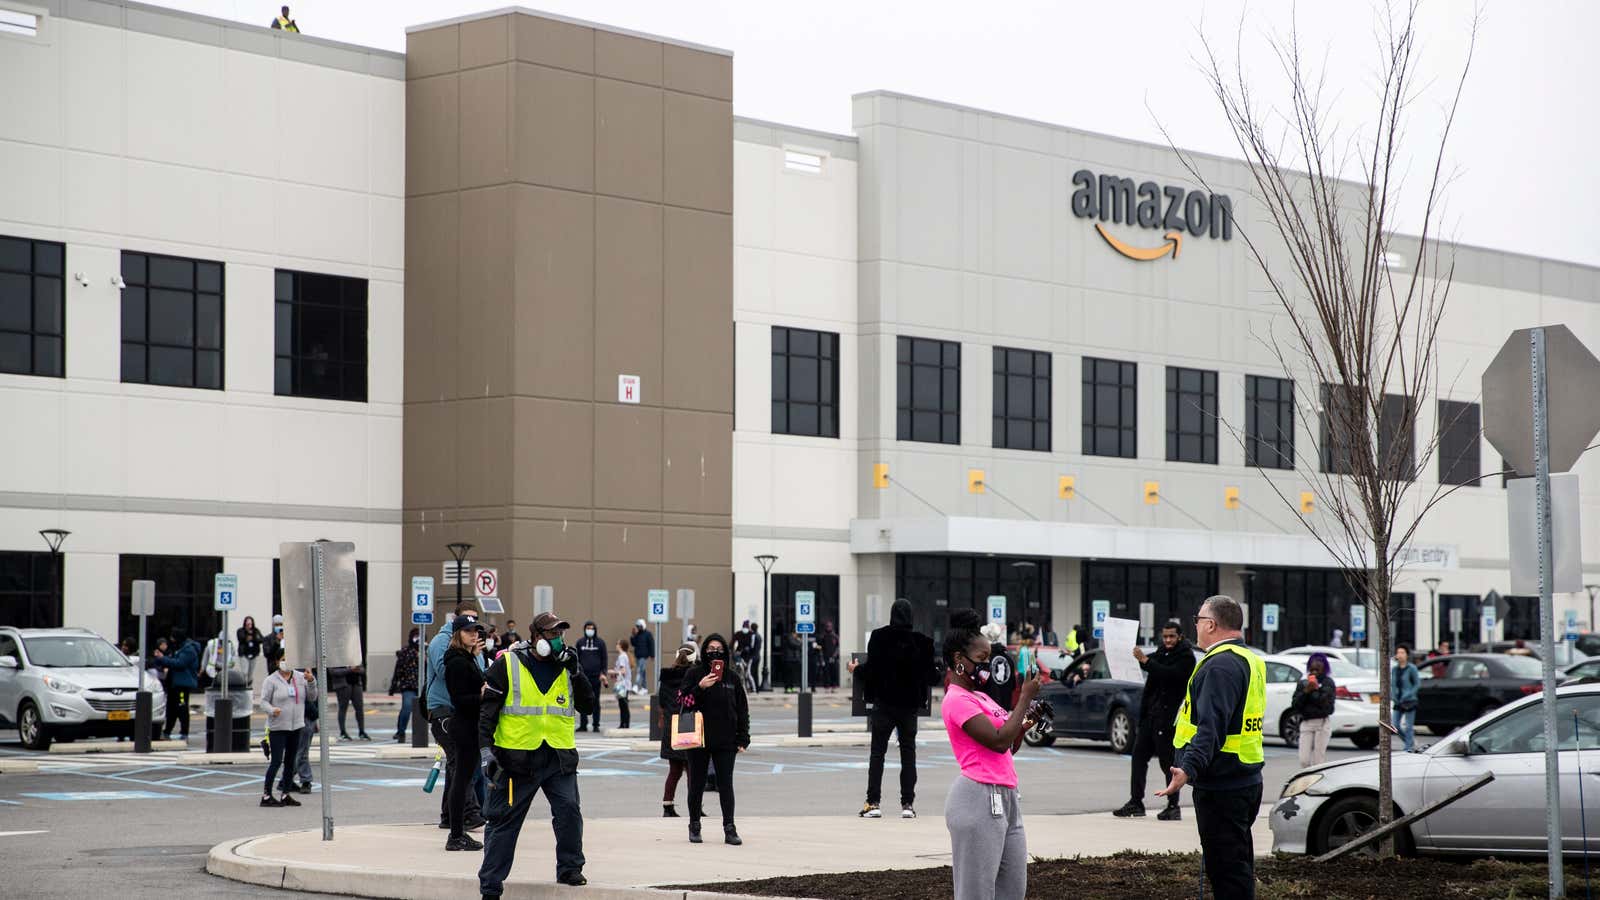 A lot of workers in Amazon’s fulfillment centers aren’t happy.